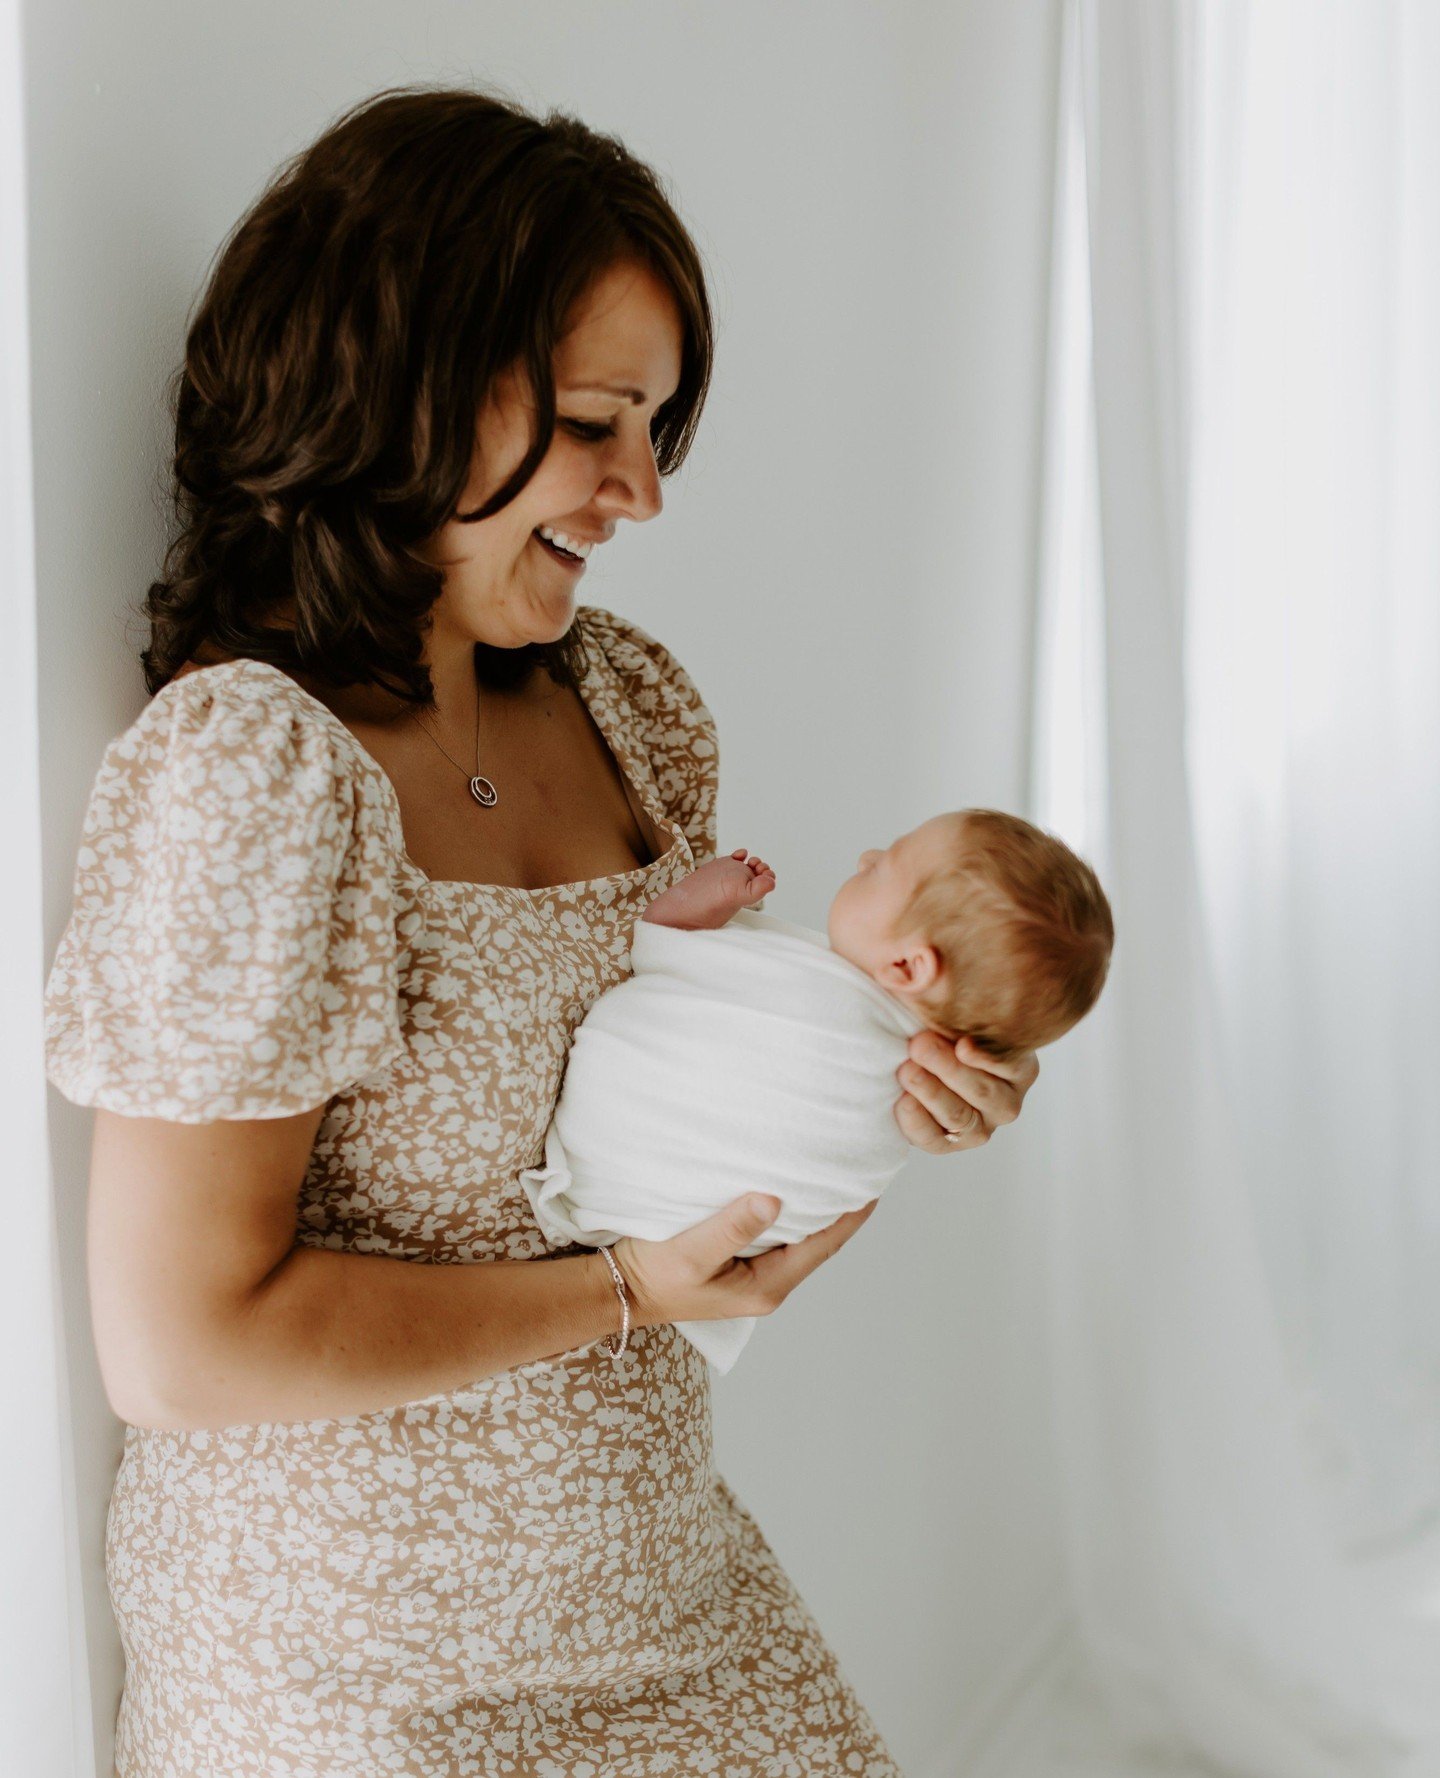 Who knew that something so small could command so much love, oh, and yes, diapers&mdash;lots and lots of diapers? ⁠
⁠
In the wee hours of the morning, amidst the lullabies and soft whispers, there's a world of tiny yawns and even tinier toes waiting 